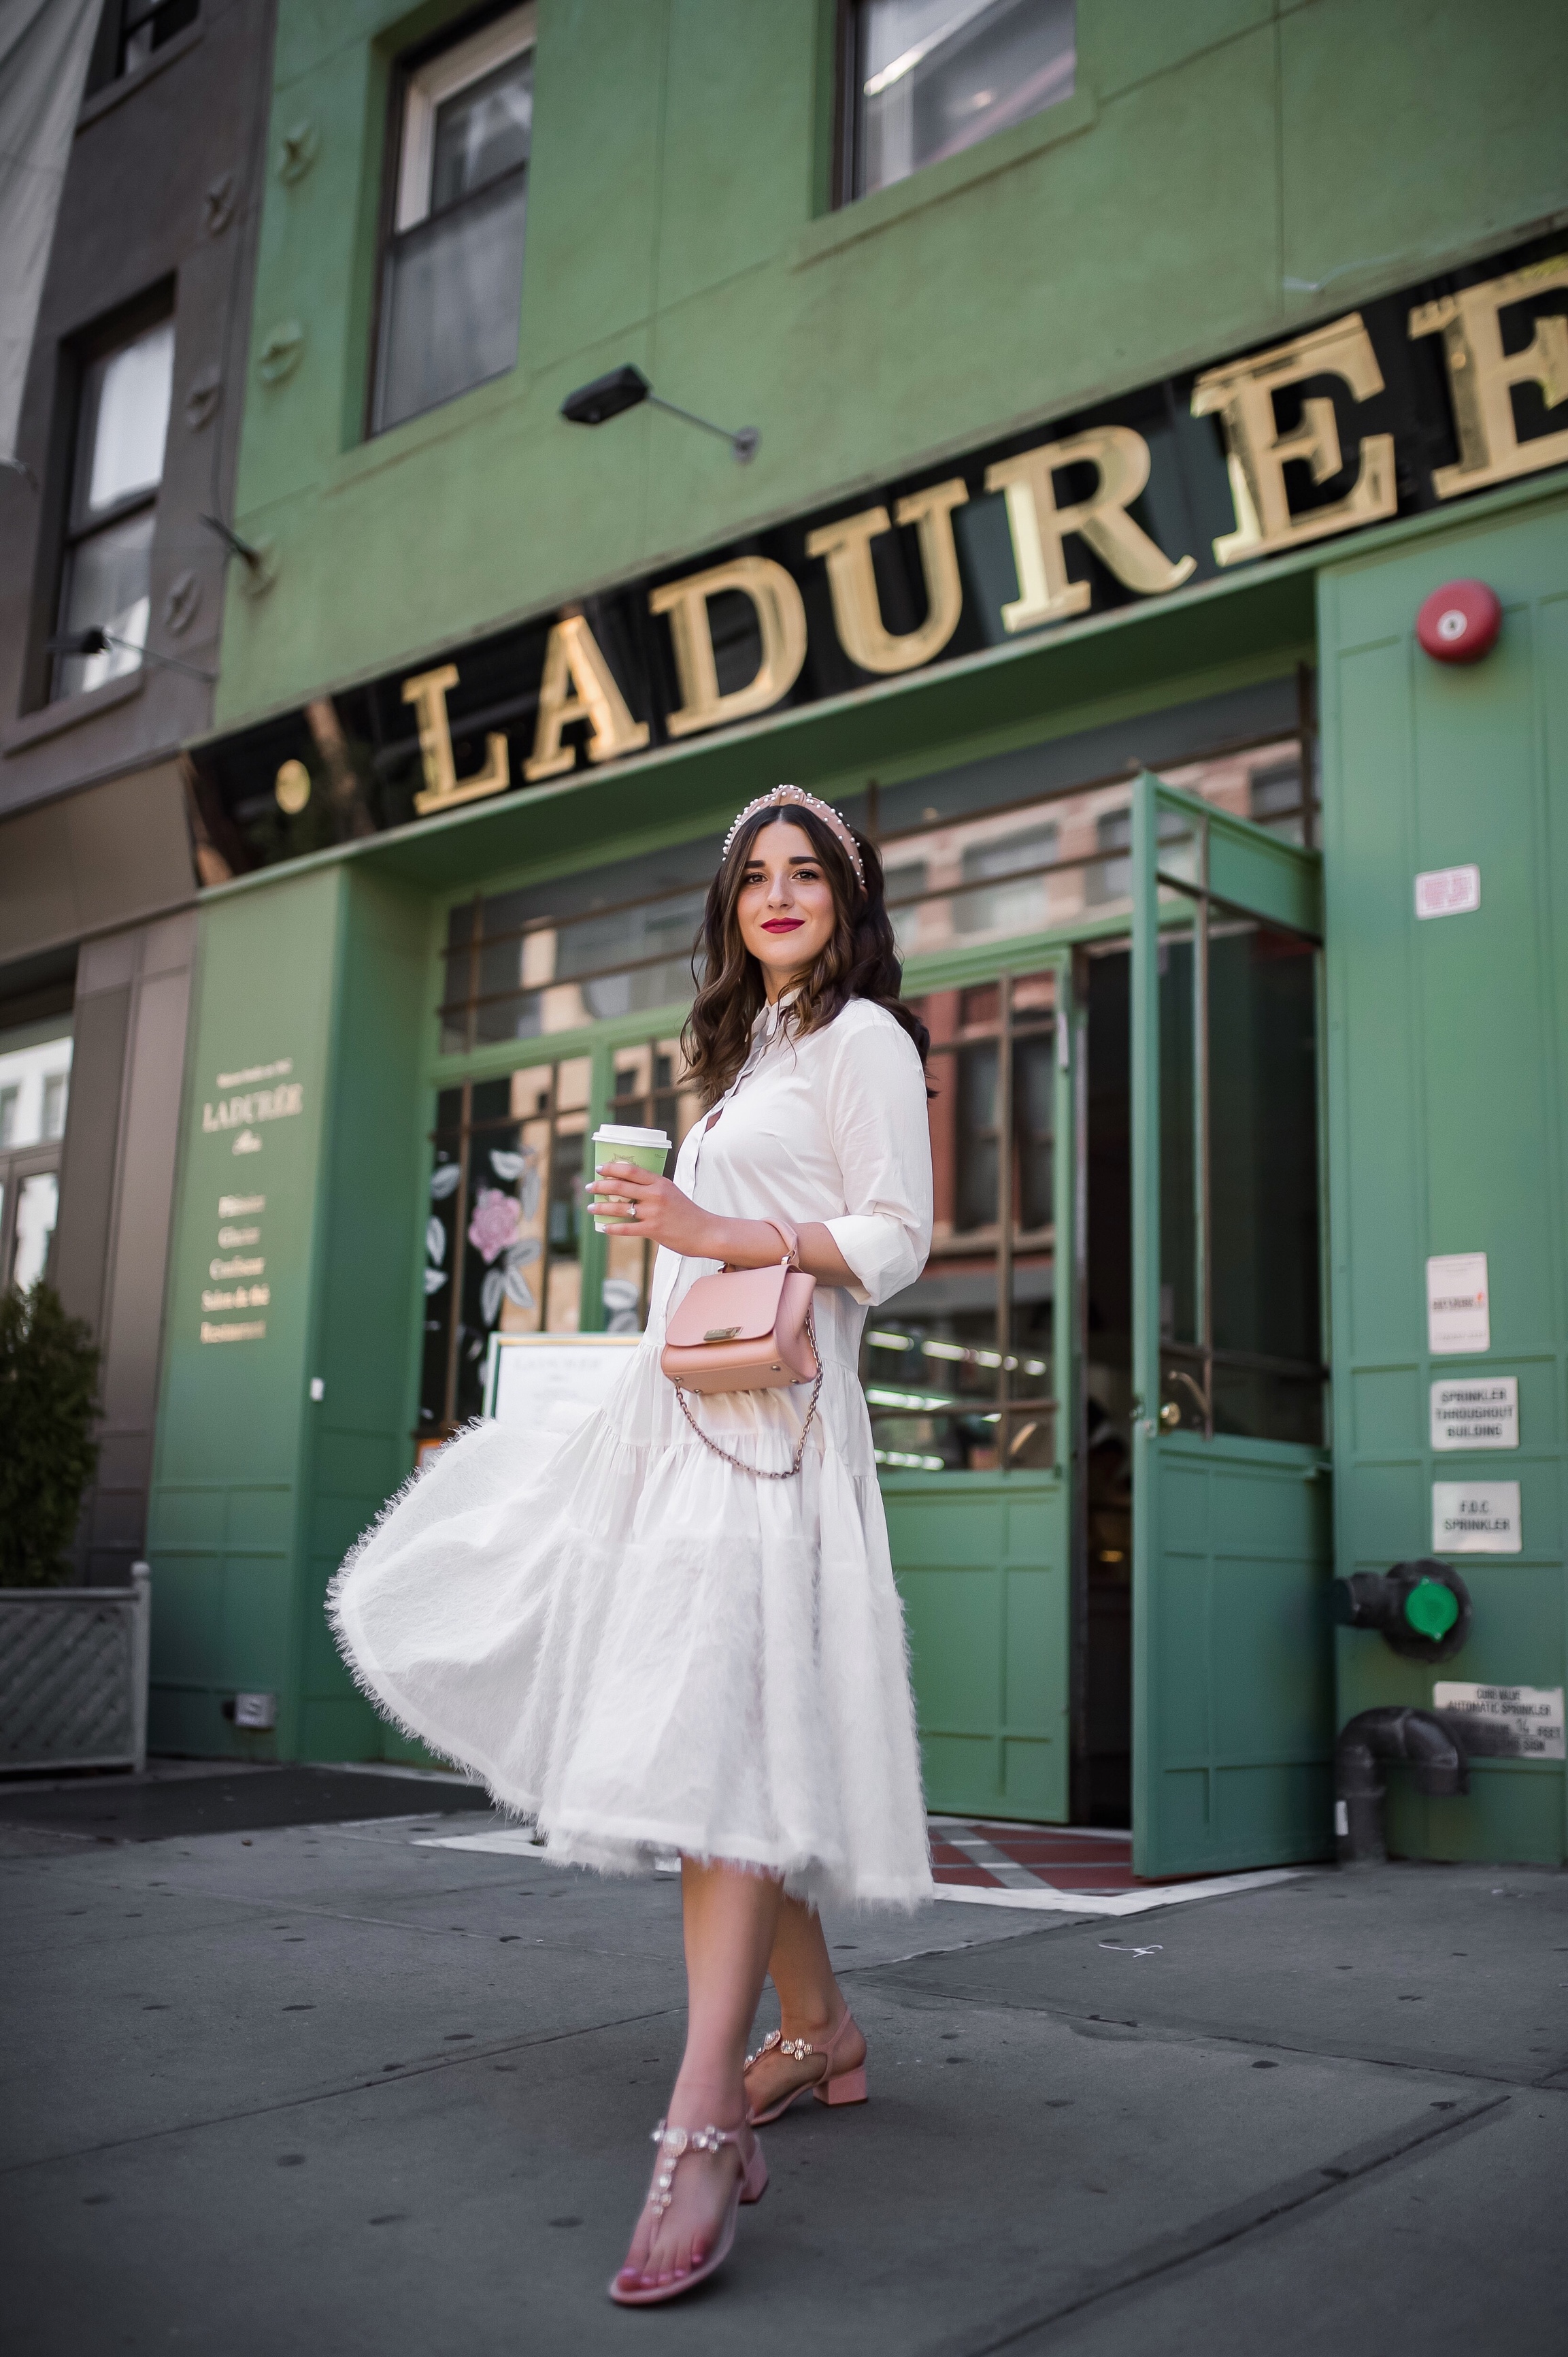 Debunking 8 Common Misconceptions About Fashion Bloggers White Midi Dress Pink Accessories Esther Santer Fashion Blog NYC Street Style Blogger Outfit OOTD Trendy Shopping Girl Headband How To Wear Pink Zac Posen Bag Sandals Jeweled Photoshoot La Duree.JPG